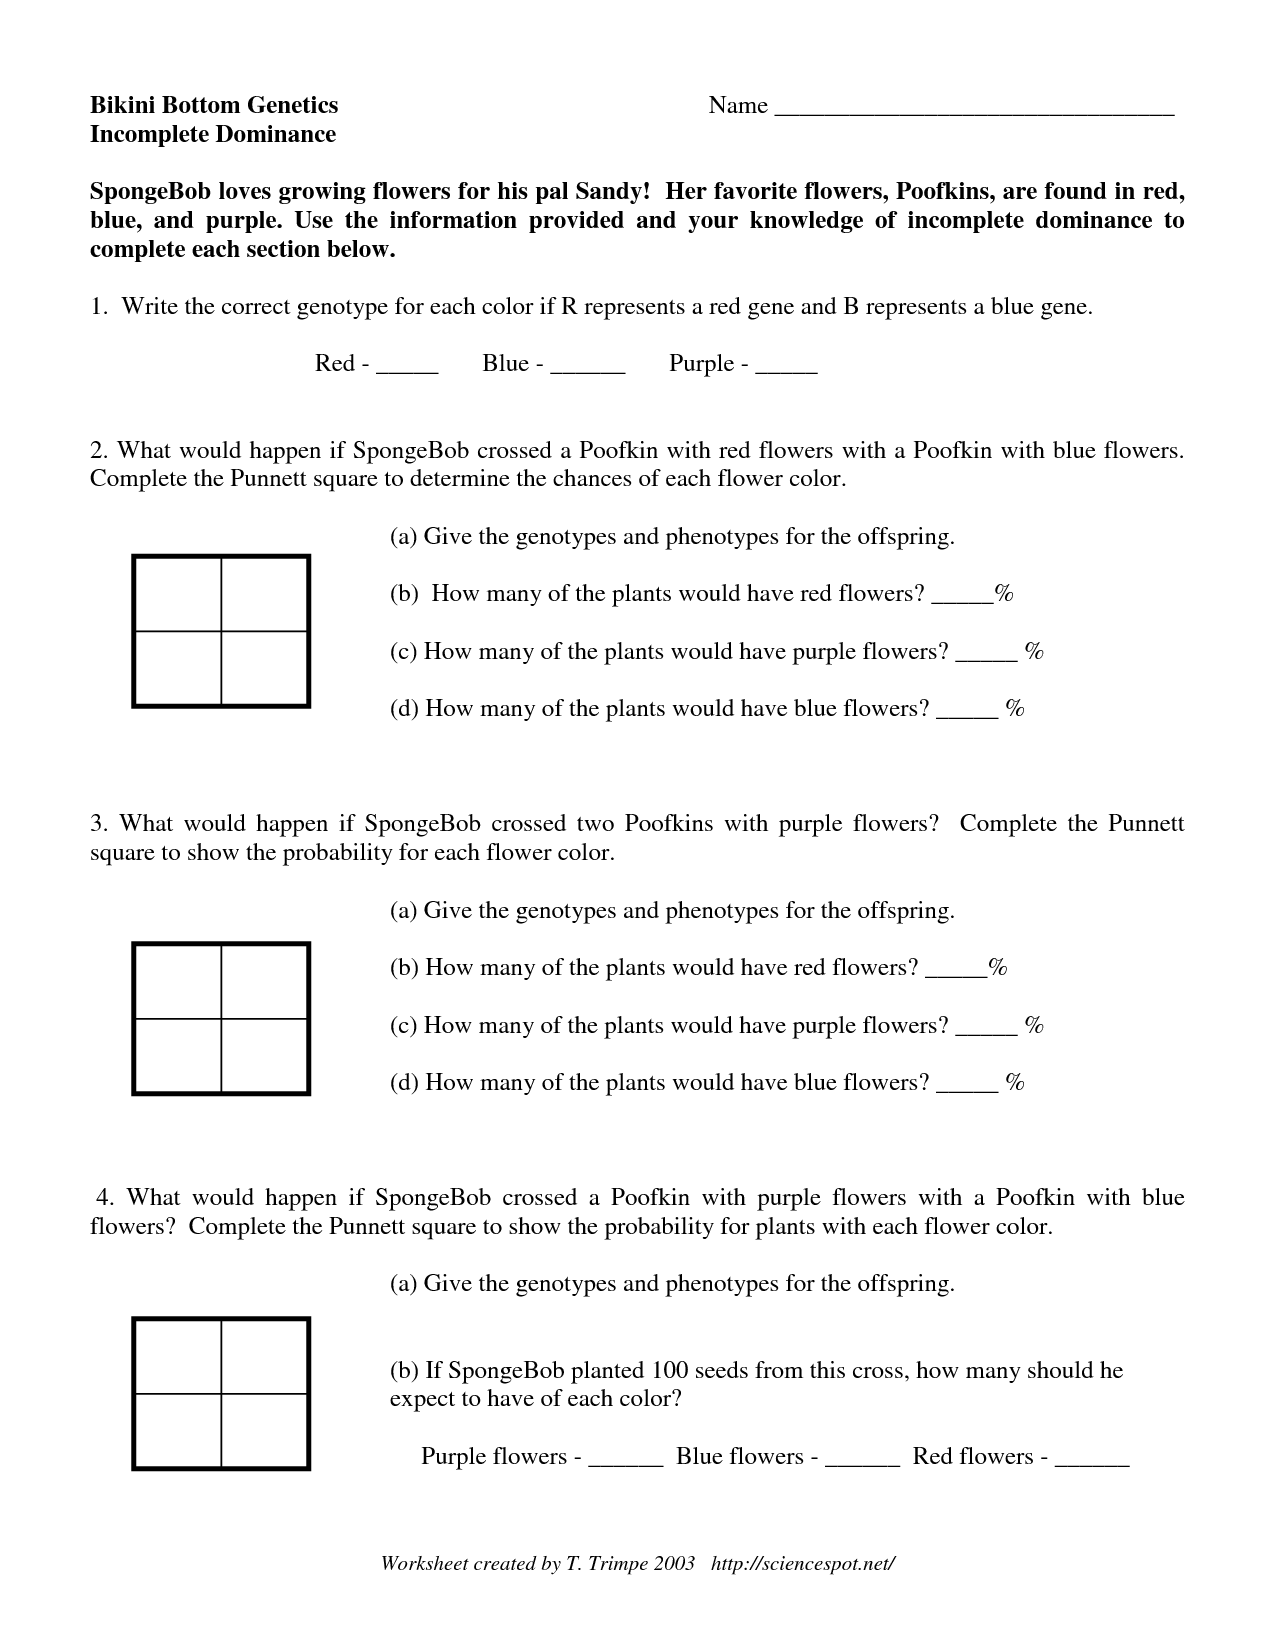  Codominance Incomplete Dominance Worksheet Free Download Goodimg co